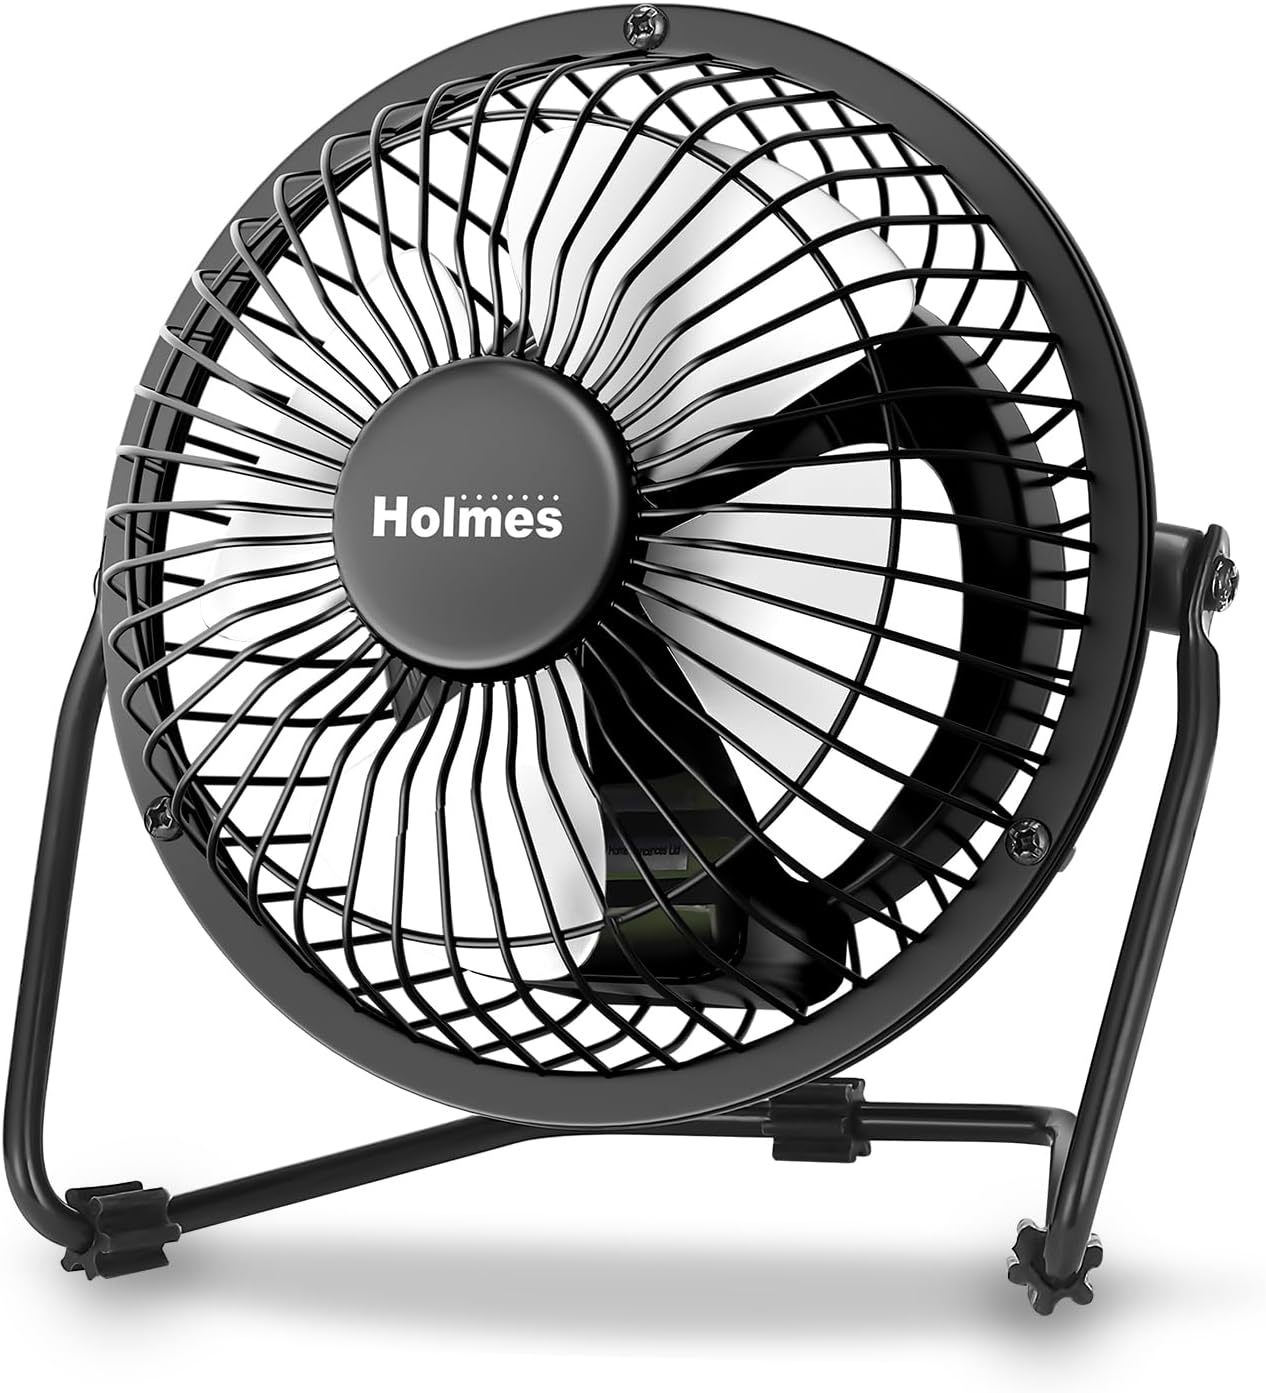 HOLMES 4 Mini High-Velocity Personal Desk Fan, 4 Blades, Adjustable 360 Head Tilt, Durable Metal Construction, Single Speed, Ideal for Home, Dorm Rooms, Bedrooms, or Offices, Black